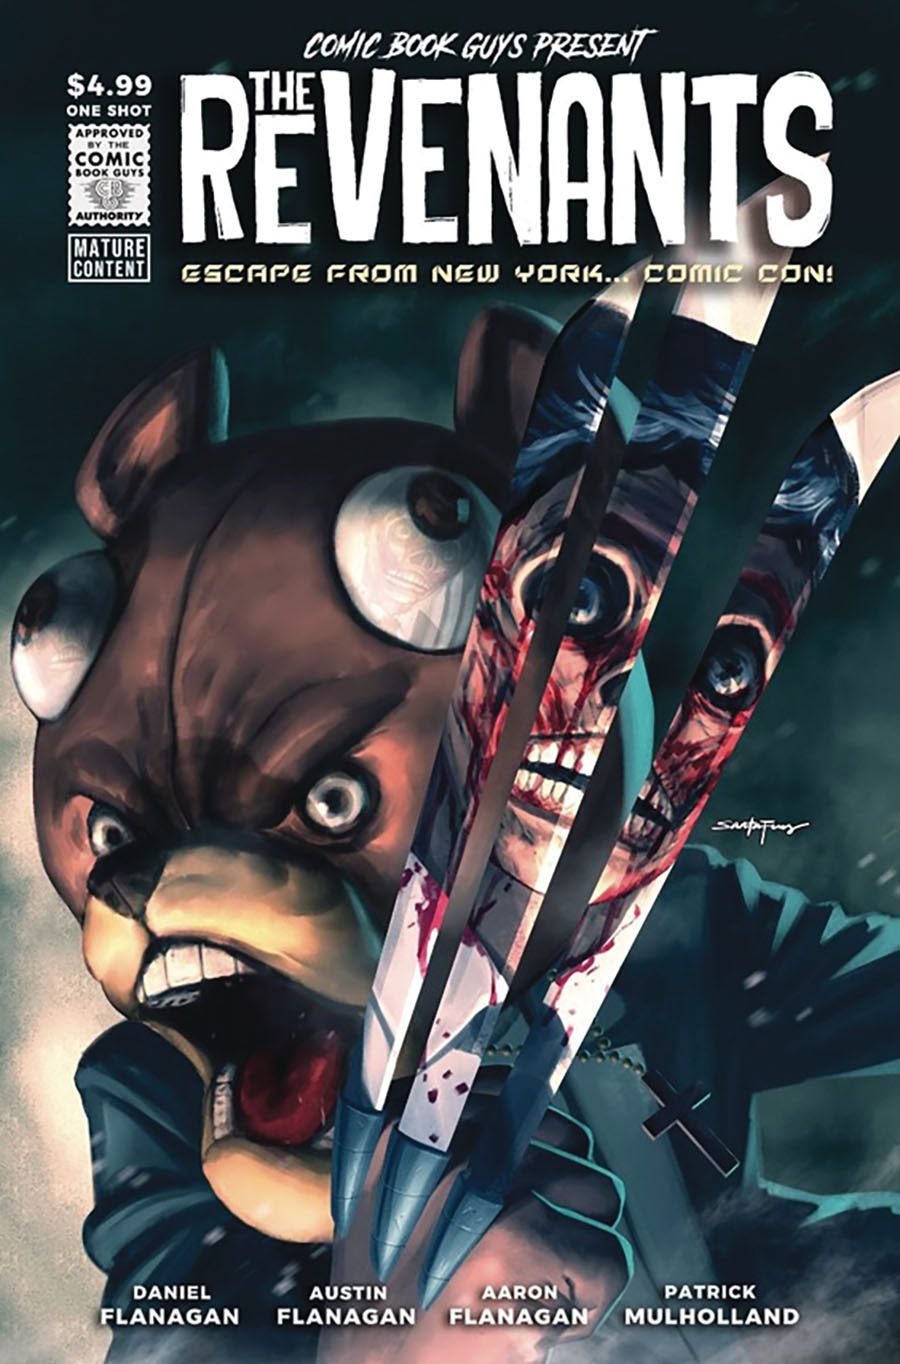 Revenants Escape From New York Comic Con #1 (One Shot) Cover G Previews Exclusive Comic Con Santa Fung Variant Cover